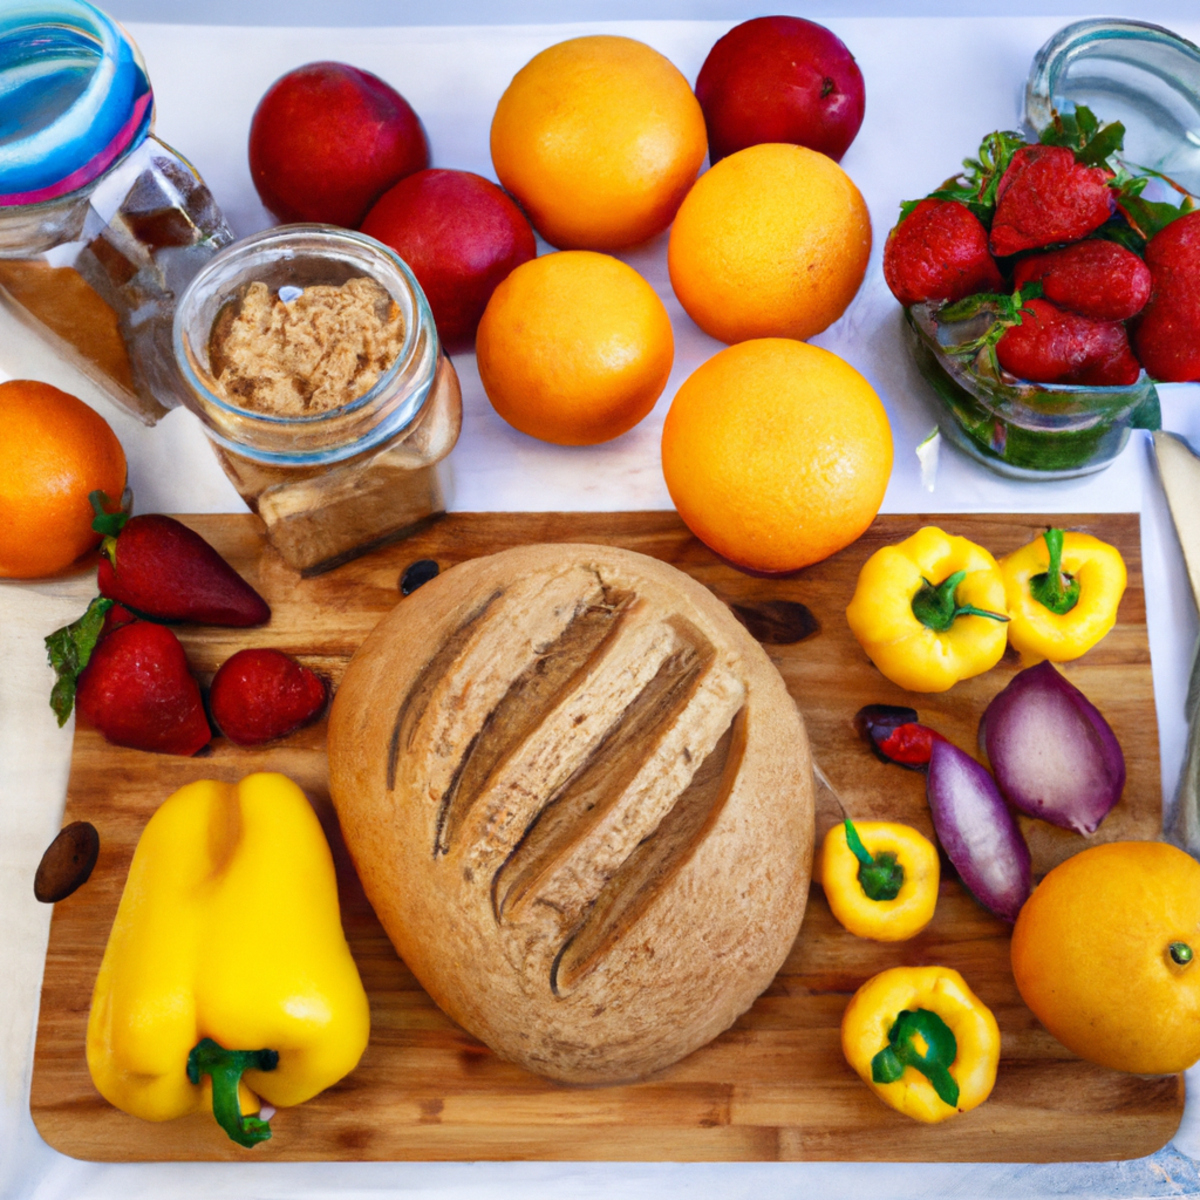 The photo features a wooden cutting board with a variety of gluten-free foods arranged neatly on top. In the center of the board is a freshly baked loaf of gluten-free bread, sliced and ready to be enjoyed. Surrounding the bread are colorful fruits and vegetables, including ripe strawberries, juicy oranges, and crisp bell peppers. A jar of almond butter and a container of hummus sit nearby, perfect for spreading on the bread or dipping the veggies. The scene is bathed in natural light, highlighting the vibrant colors and textures of the food. This photo perfectly captures the delicious and nutritious options available when switching to a gluten-free diet.